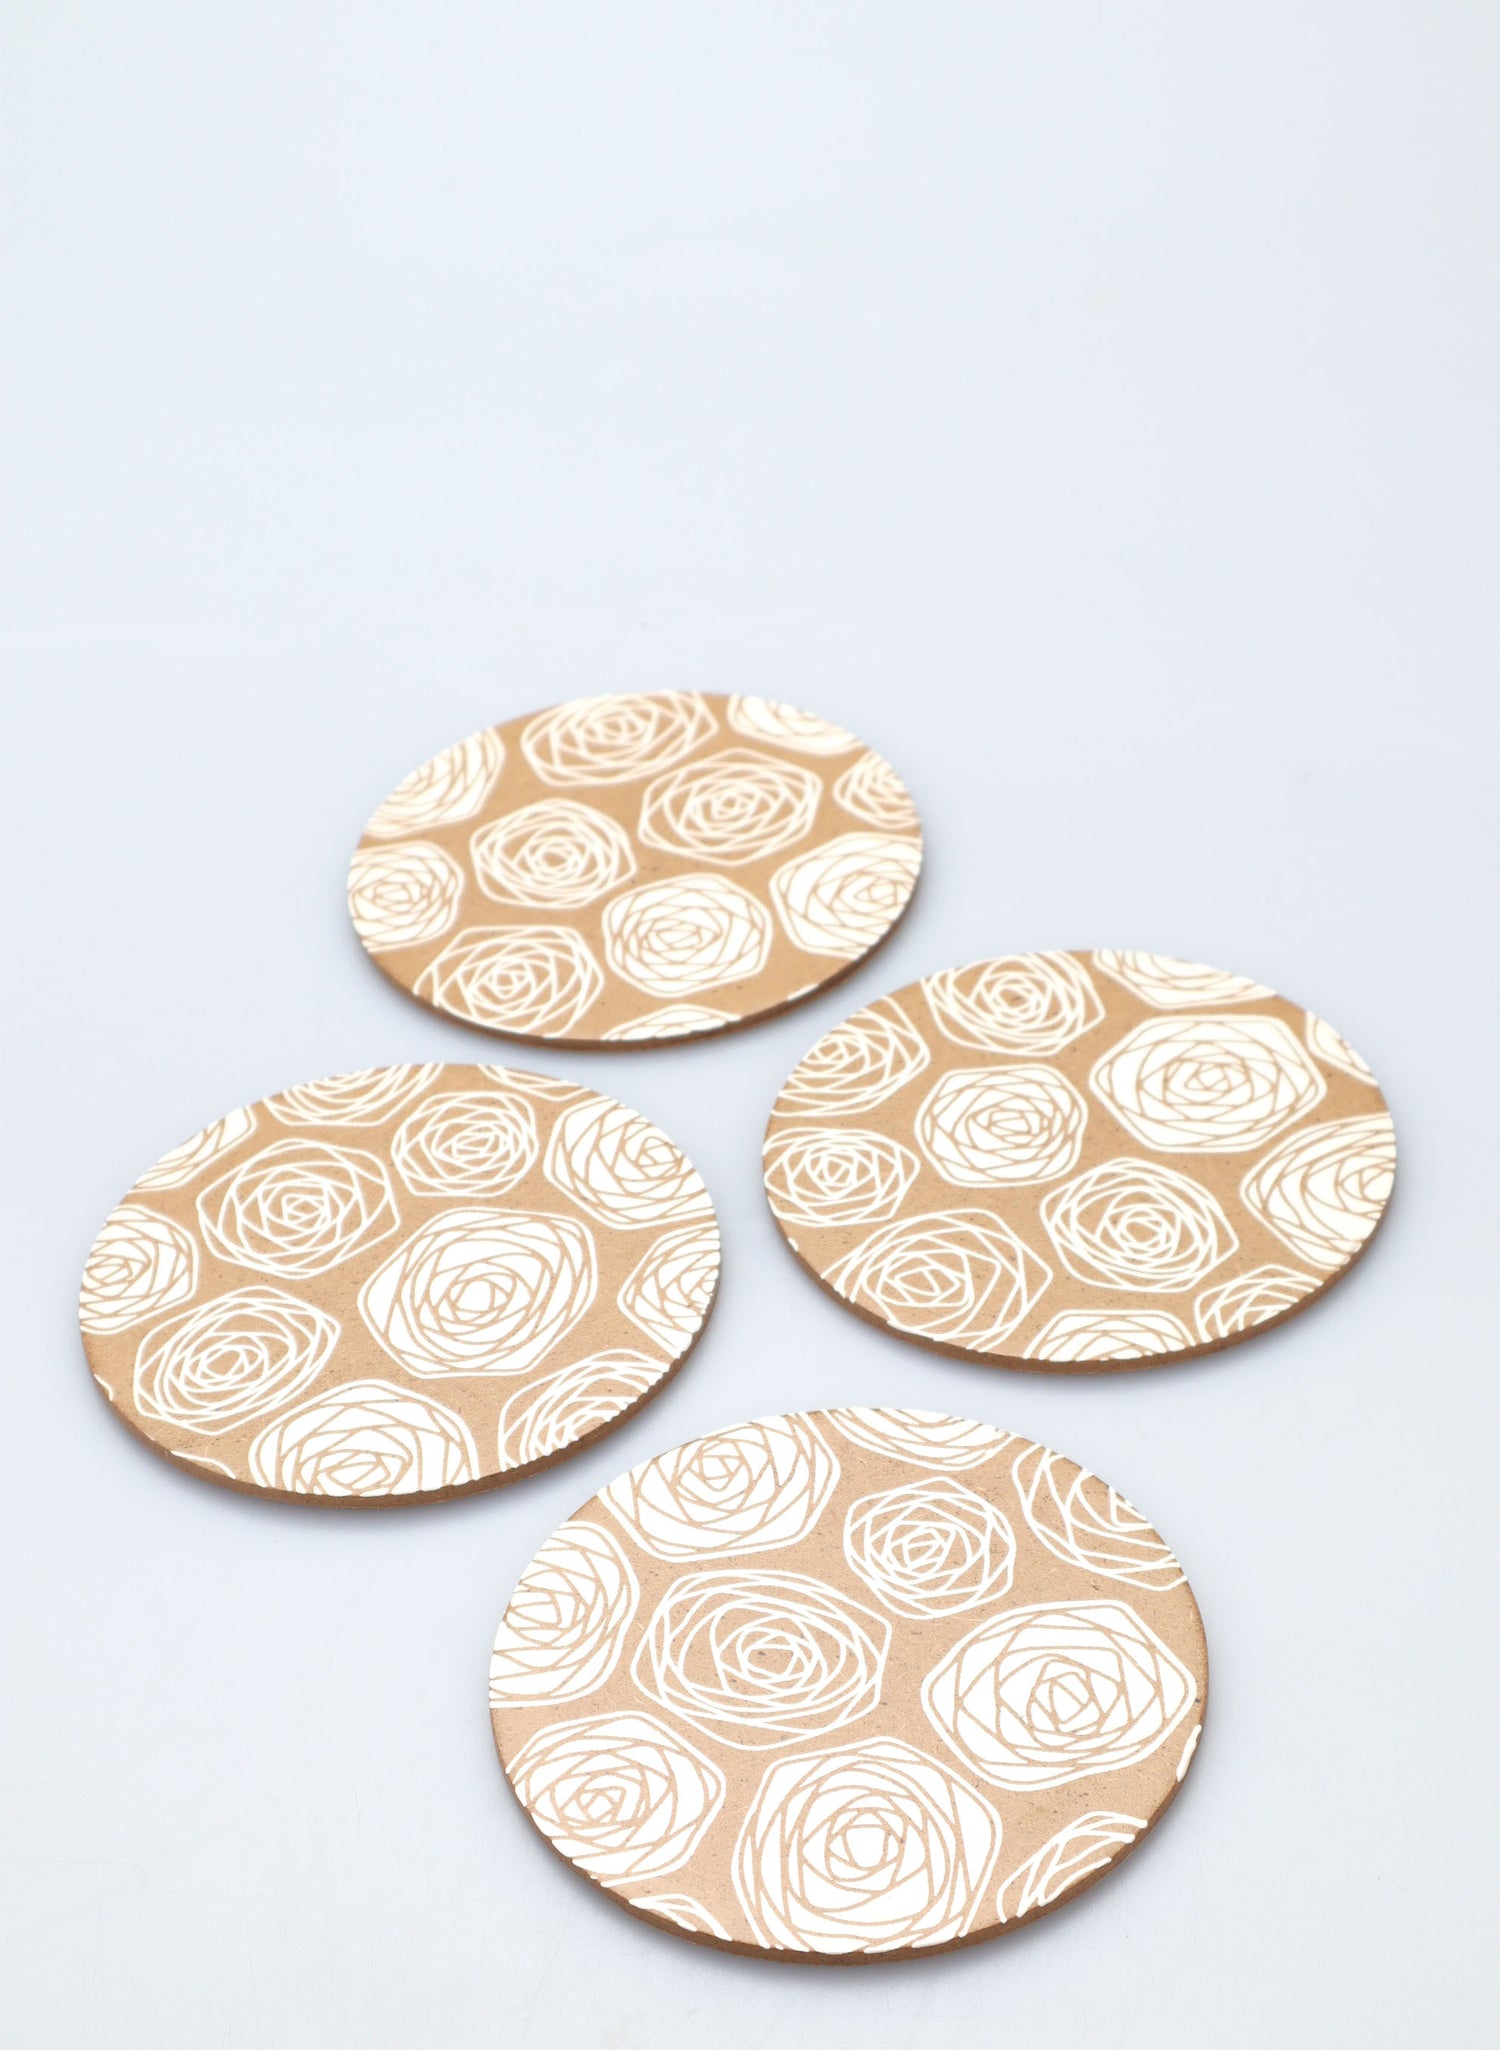 Another Sweet Rose Coaster